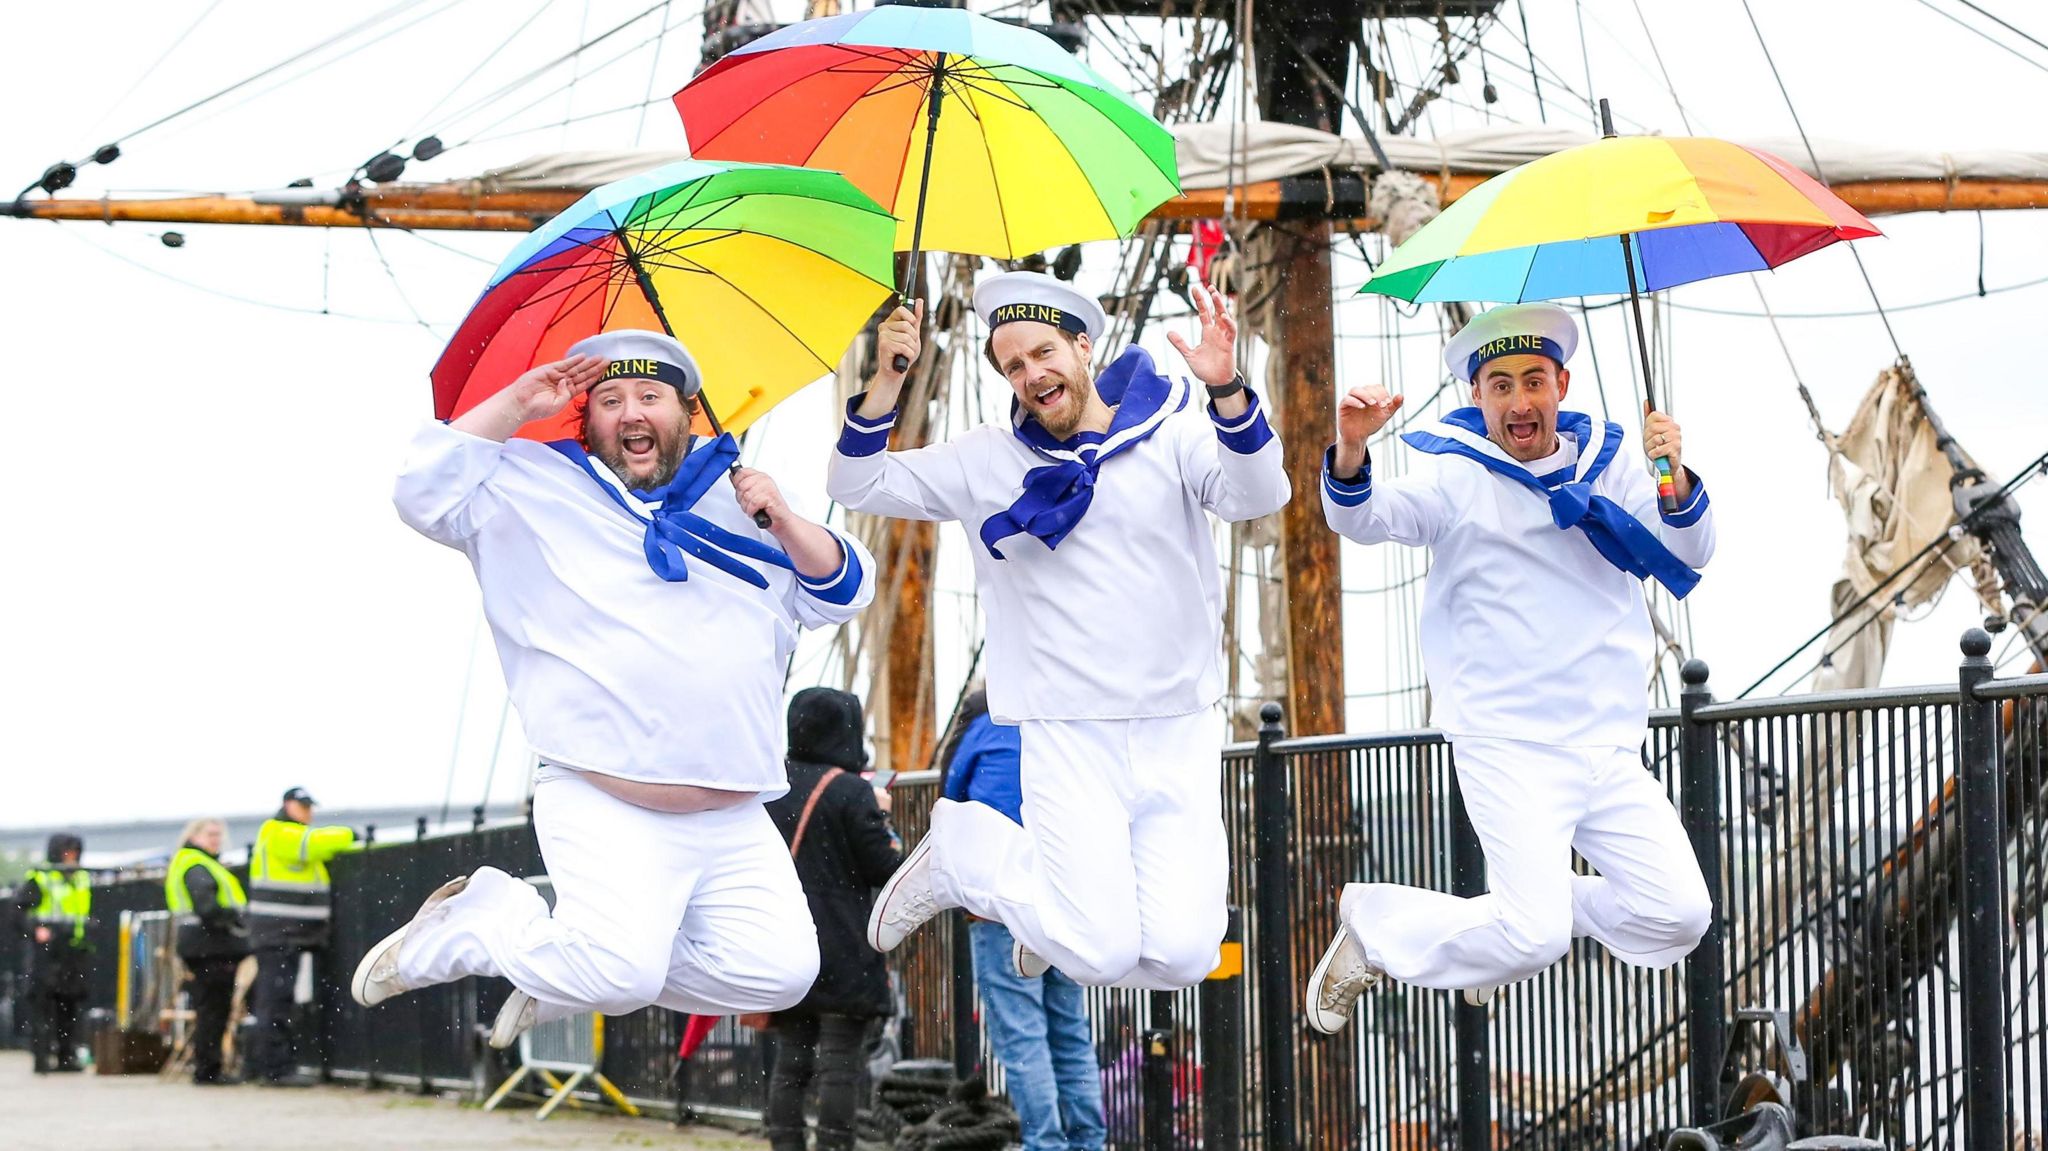 Three men stood in front of a tall ship and dressed as sailor jump in the air while holdiing multi coloured umbrellas